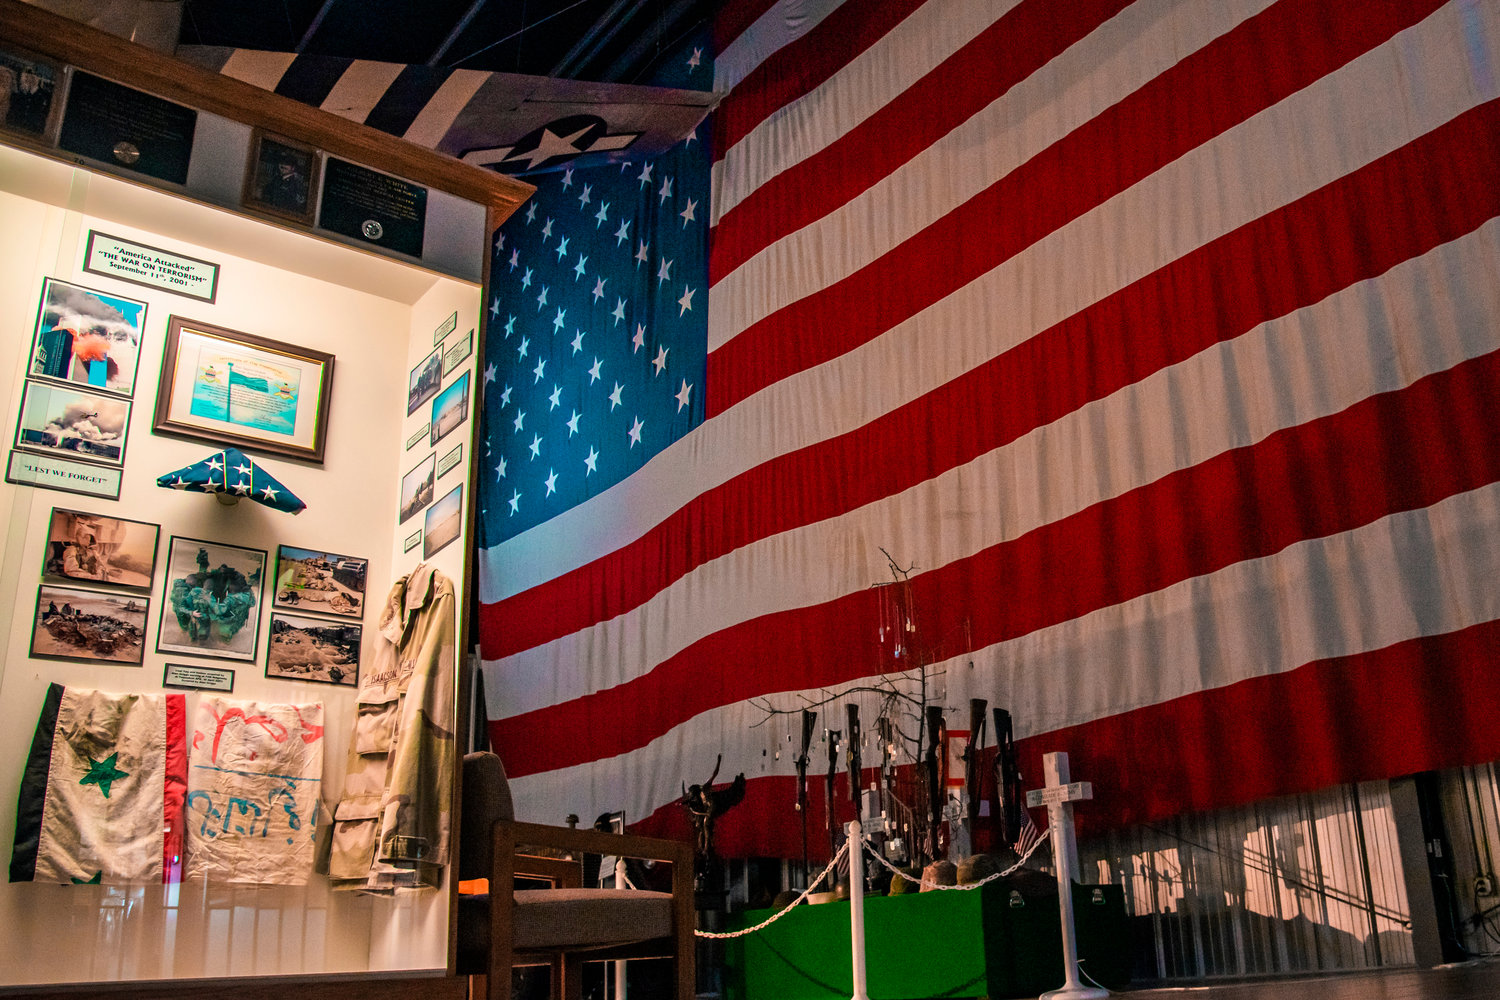 A display case which highlights details of September 11, 2001 is illuminated inside the Veterans Memorial Museum  in Chehalis as an American Flag sets the backdrop.